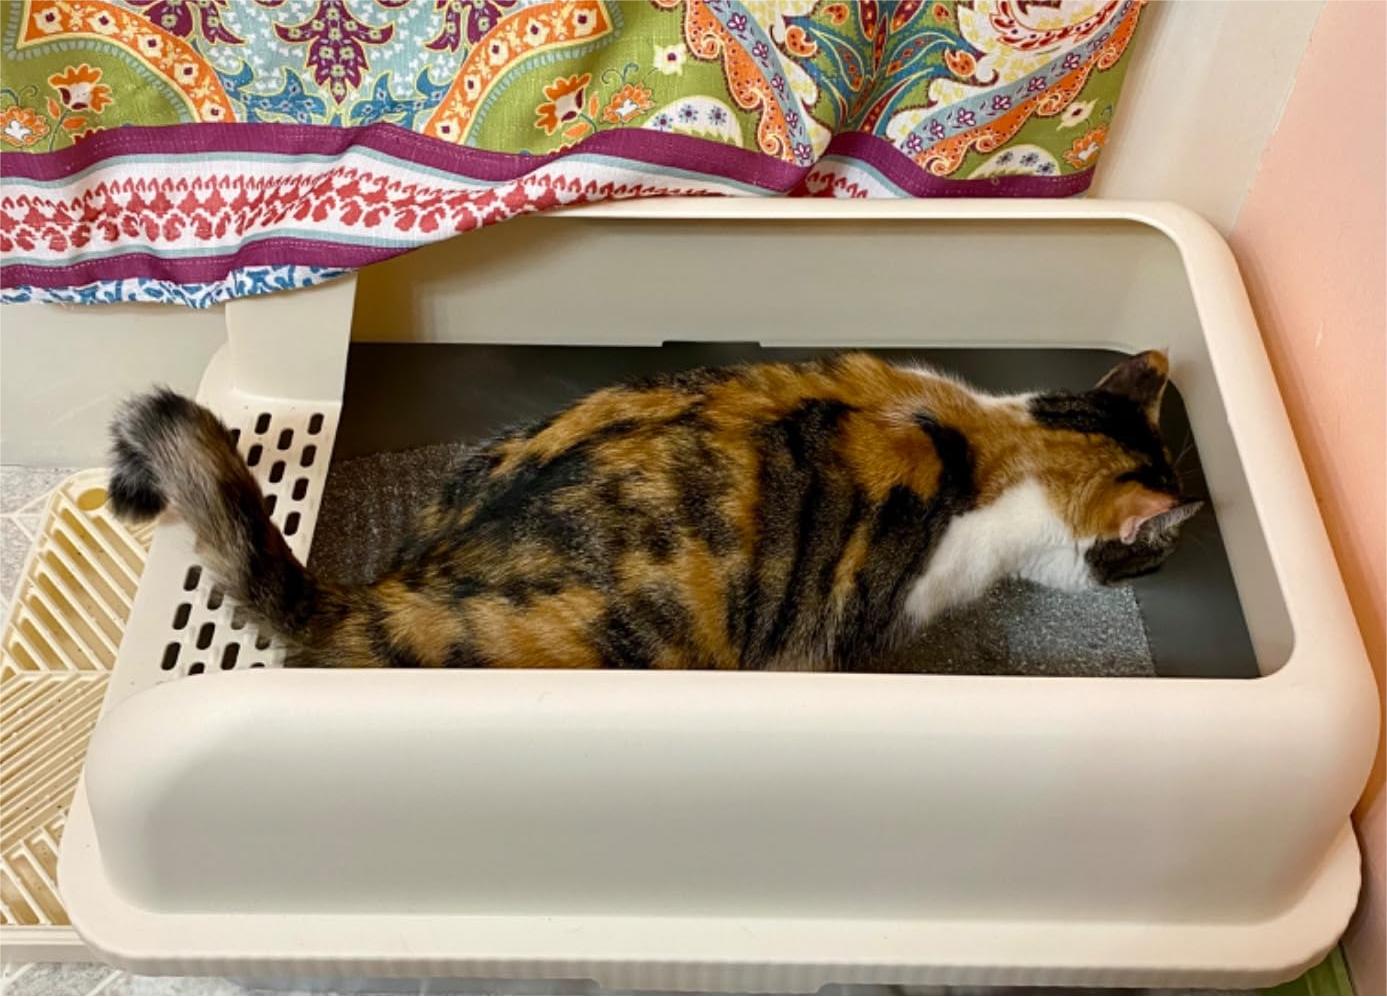 Why Your Cat Needs a Stainless Steel Litter Box